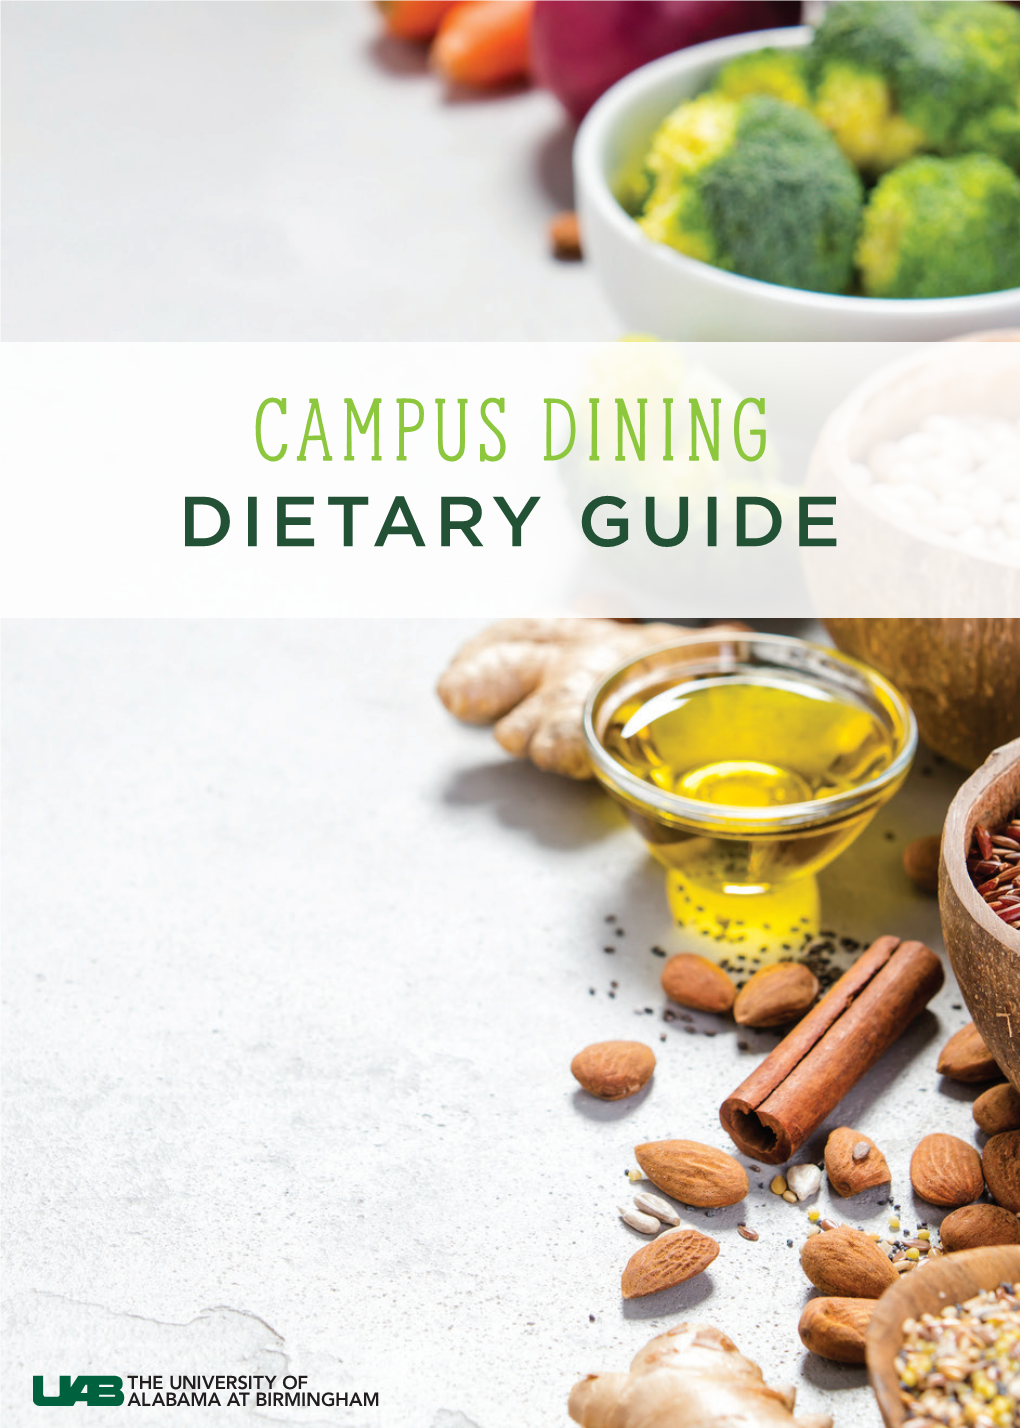 Heal Y Living on Campus UAB Campus Dining Has a Variety of Unique Options to Accommo- Date Dietary Restrictions and Preferences at All of Our Locations